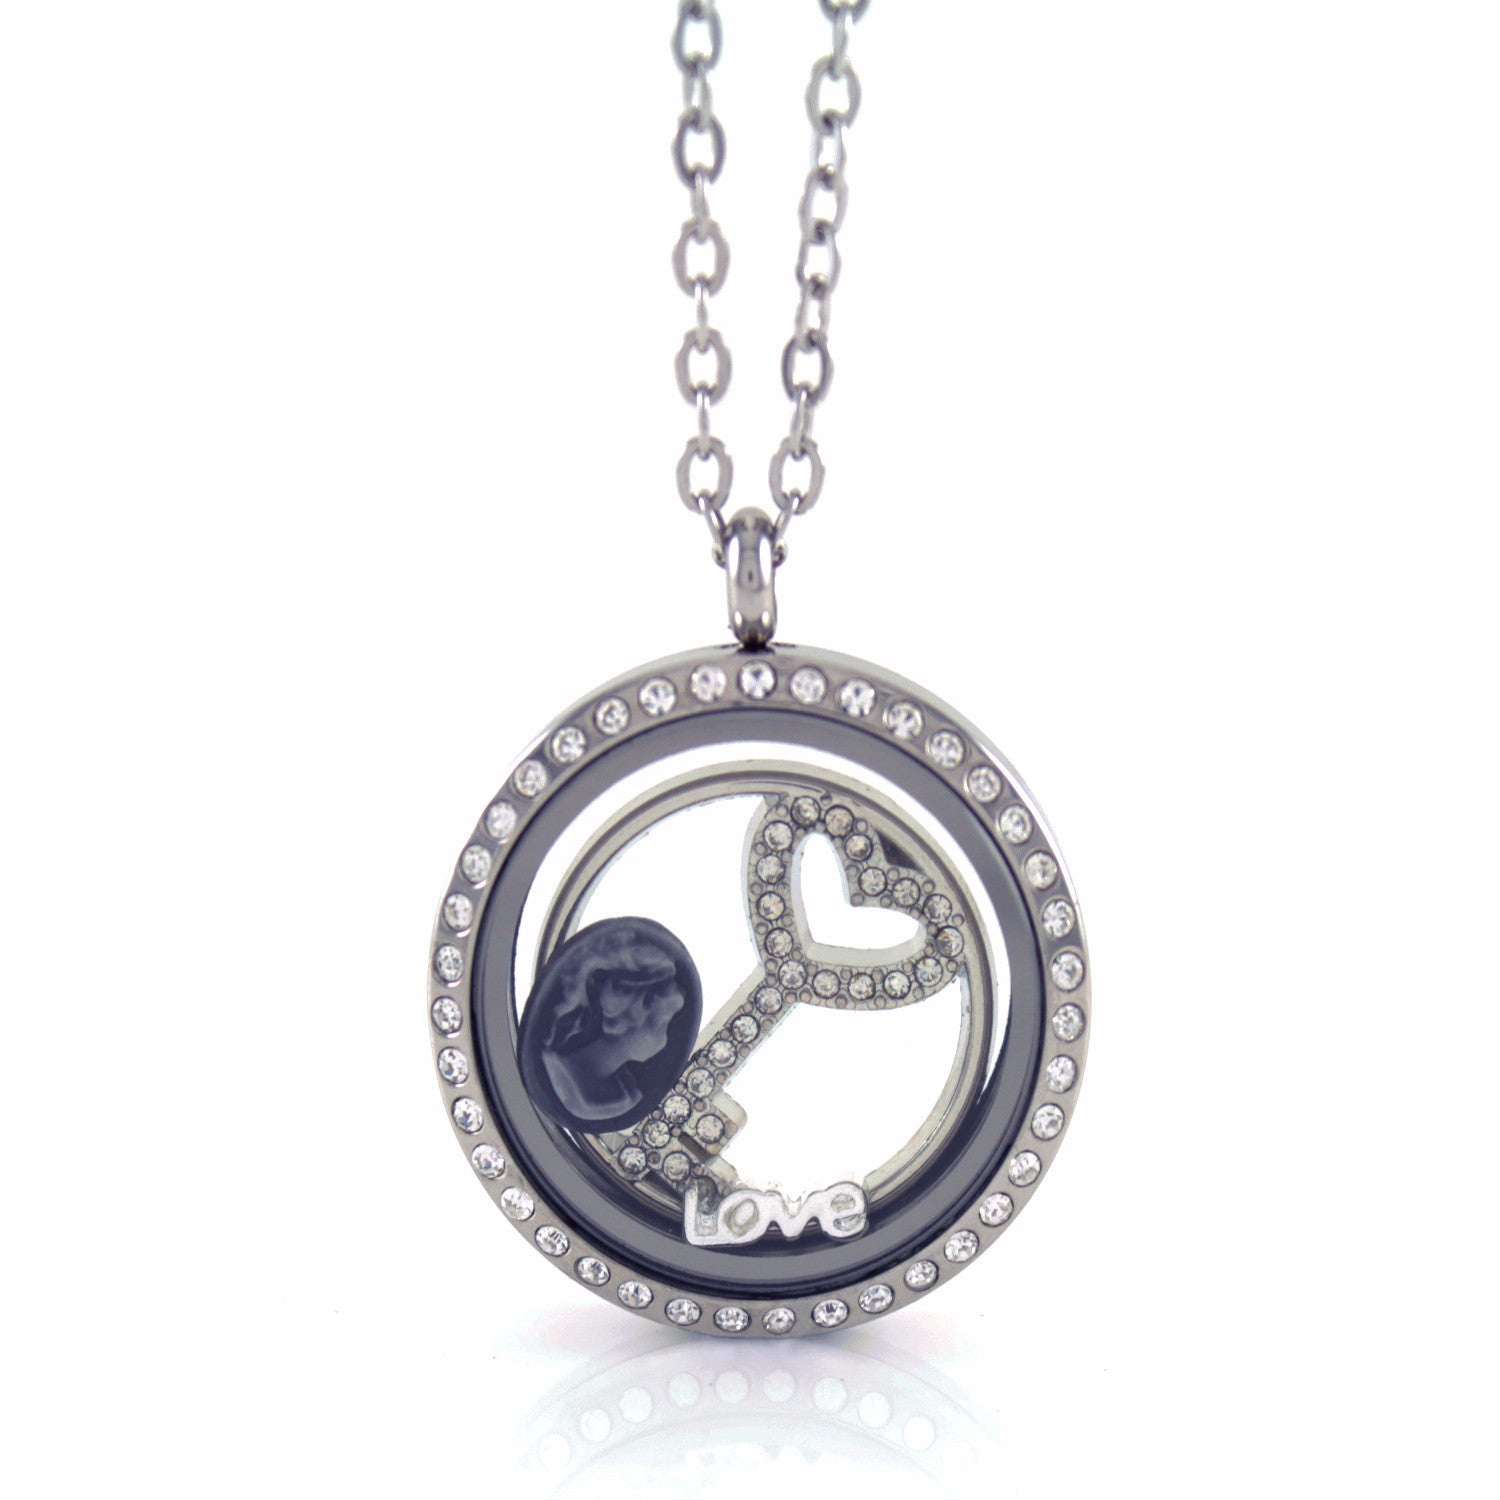 Stainless Steel Floating Locket Necklace with 6 Charms, 1 Plate, Chain (Silver Rhinestone Circle)